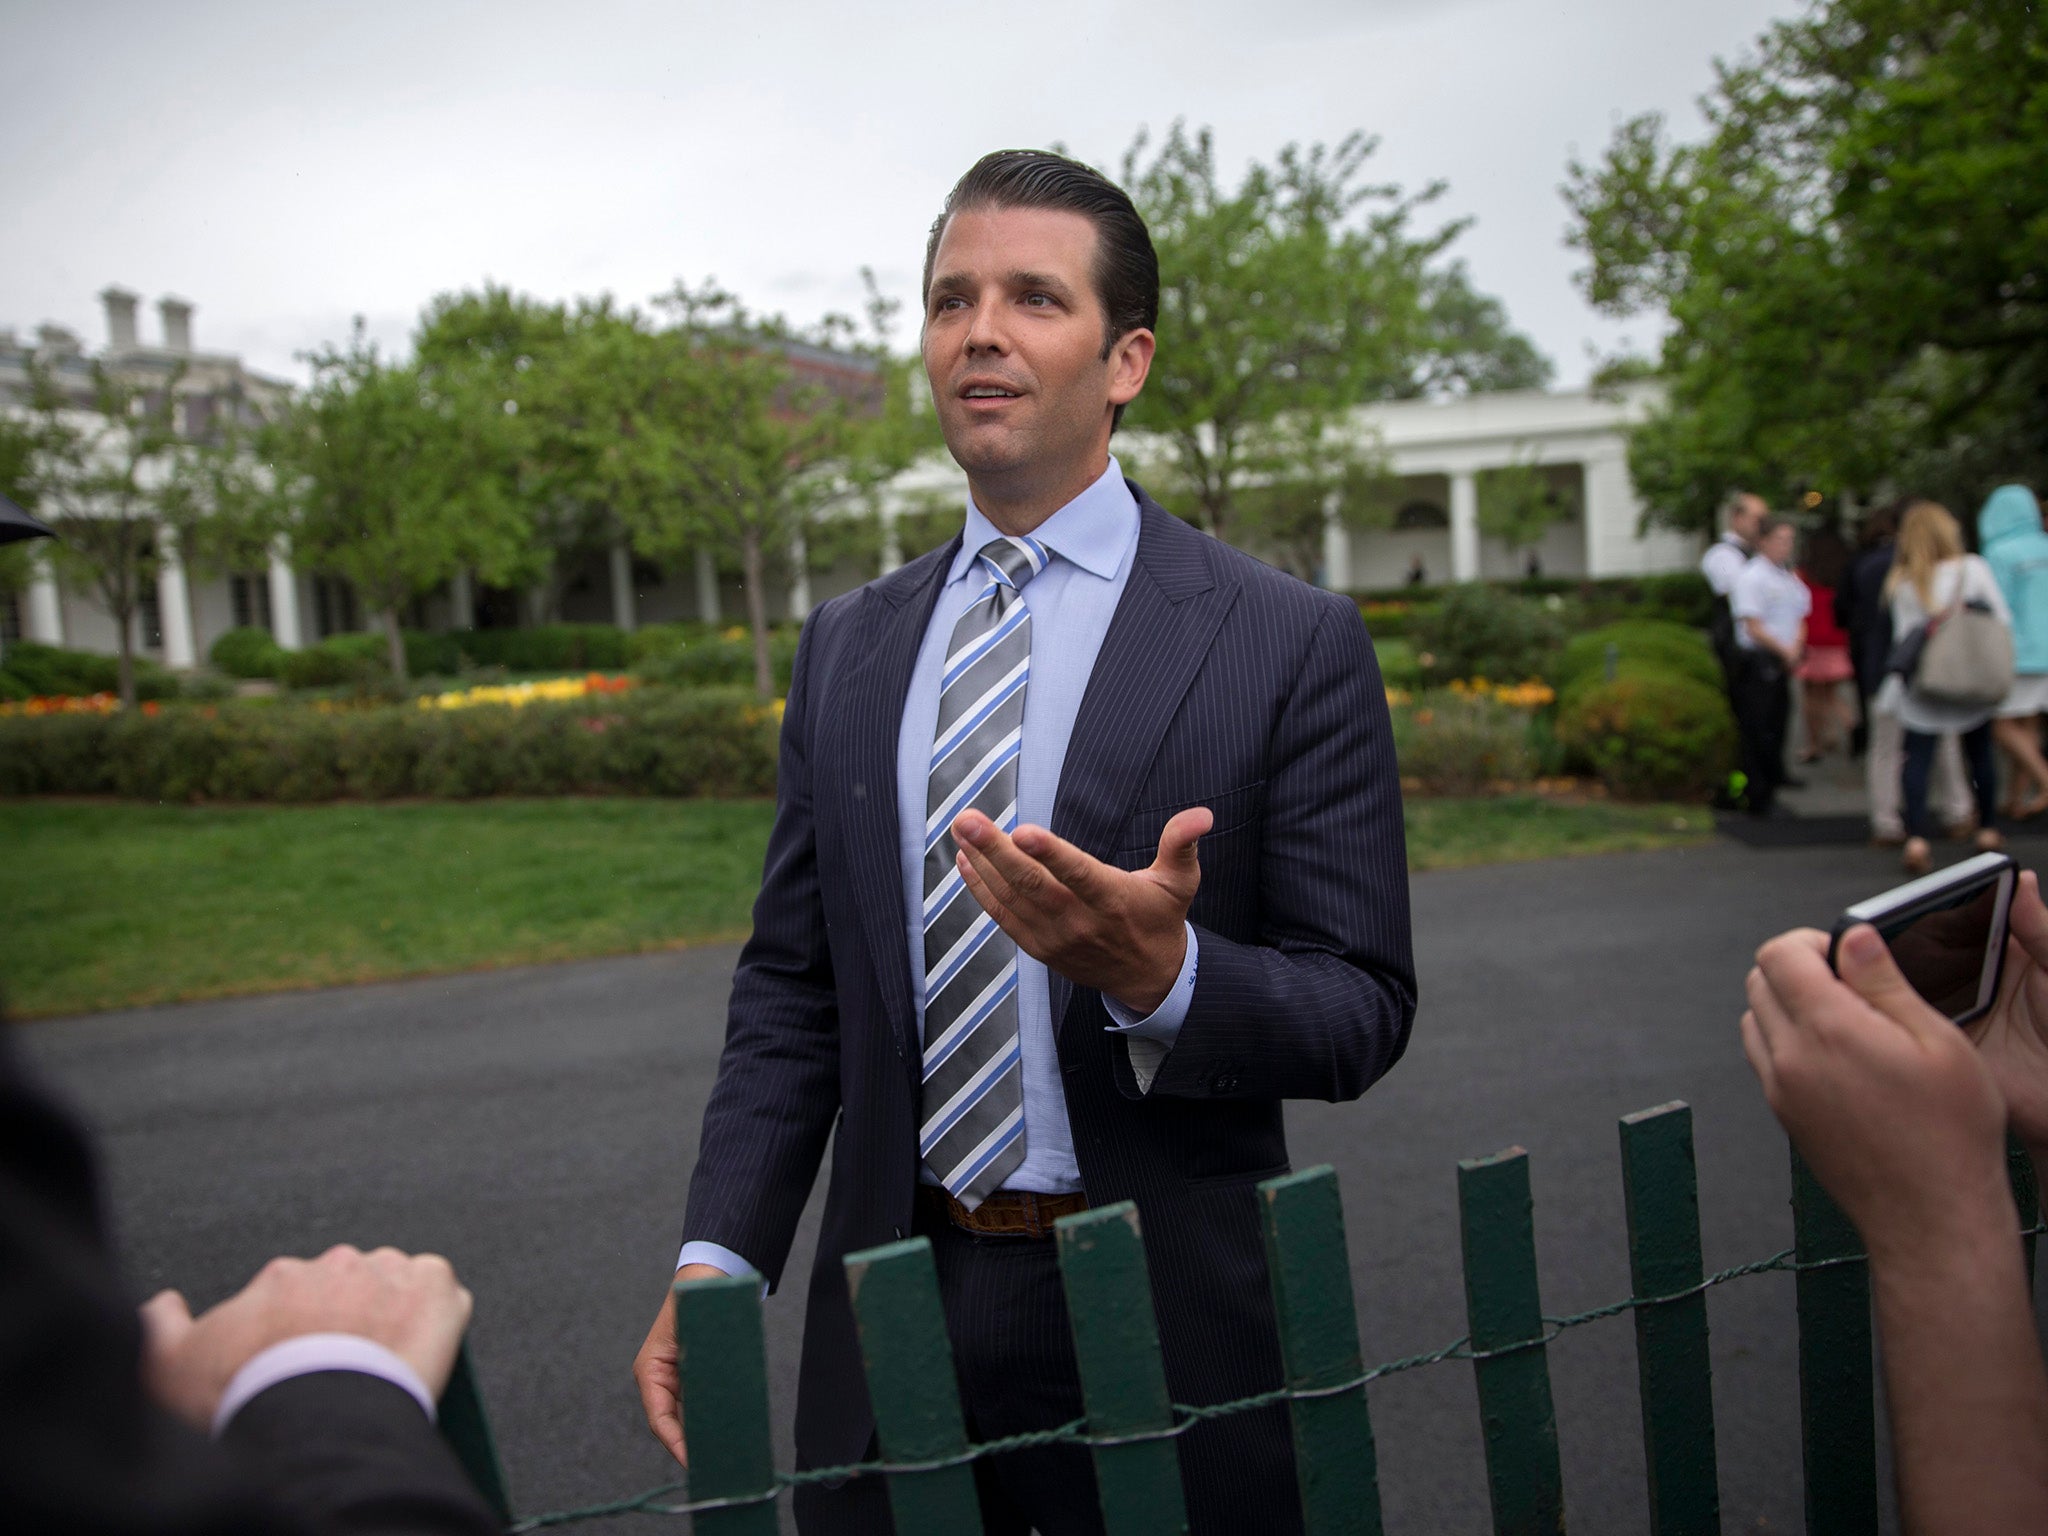 Donald Trump Jr has admitted having been in direct contact with WikiLeaks